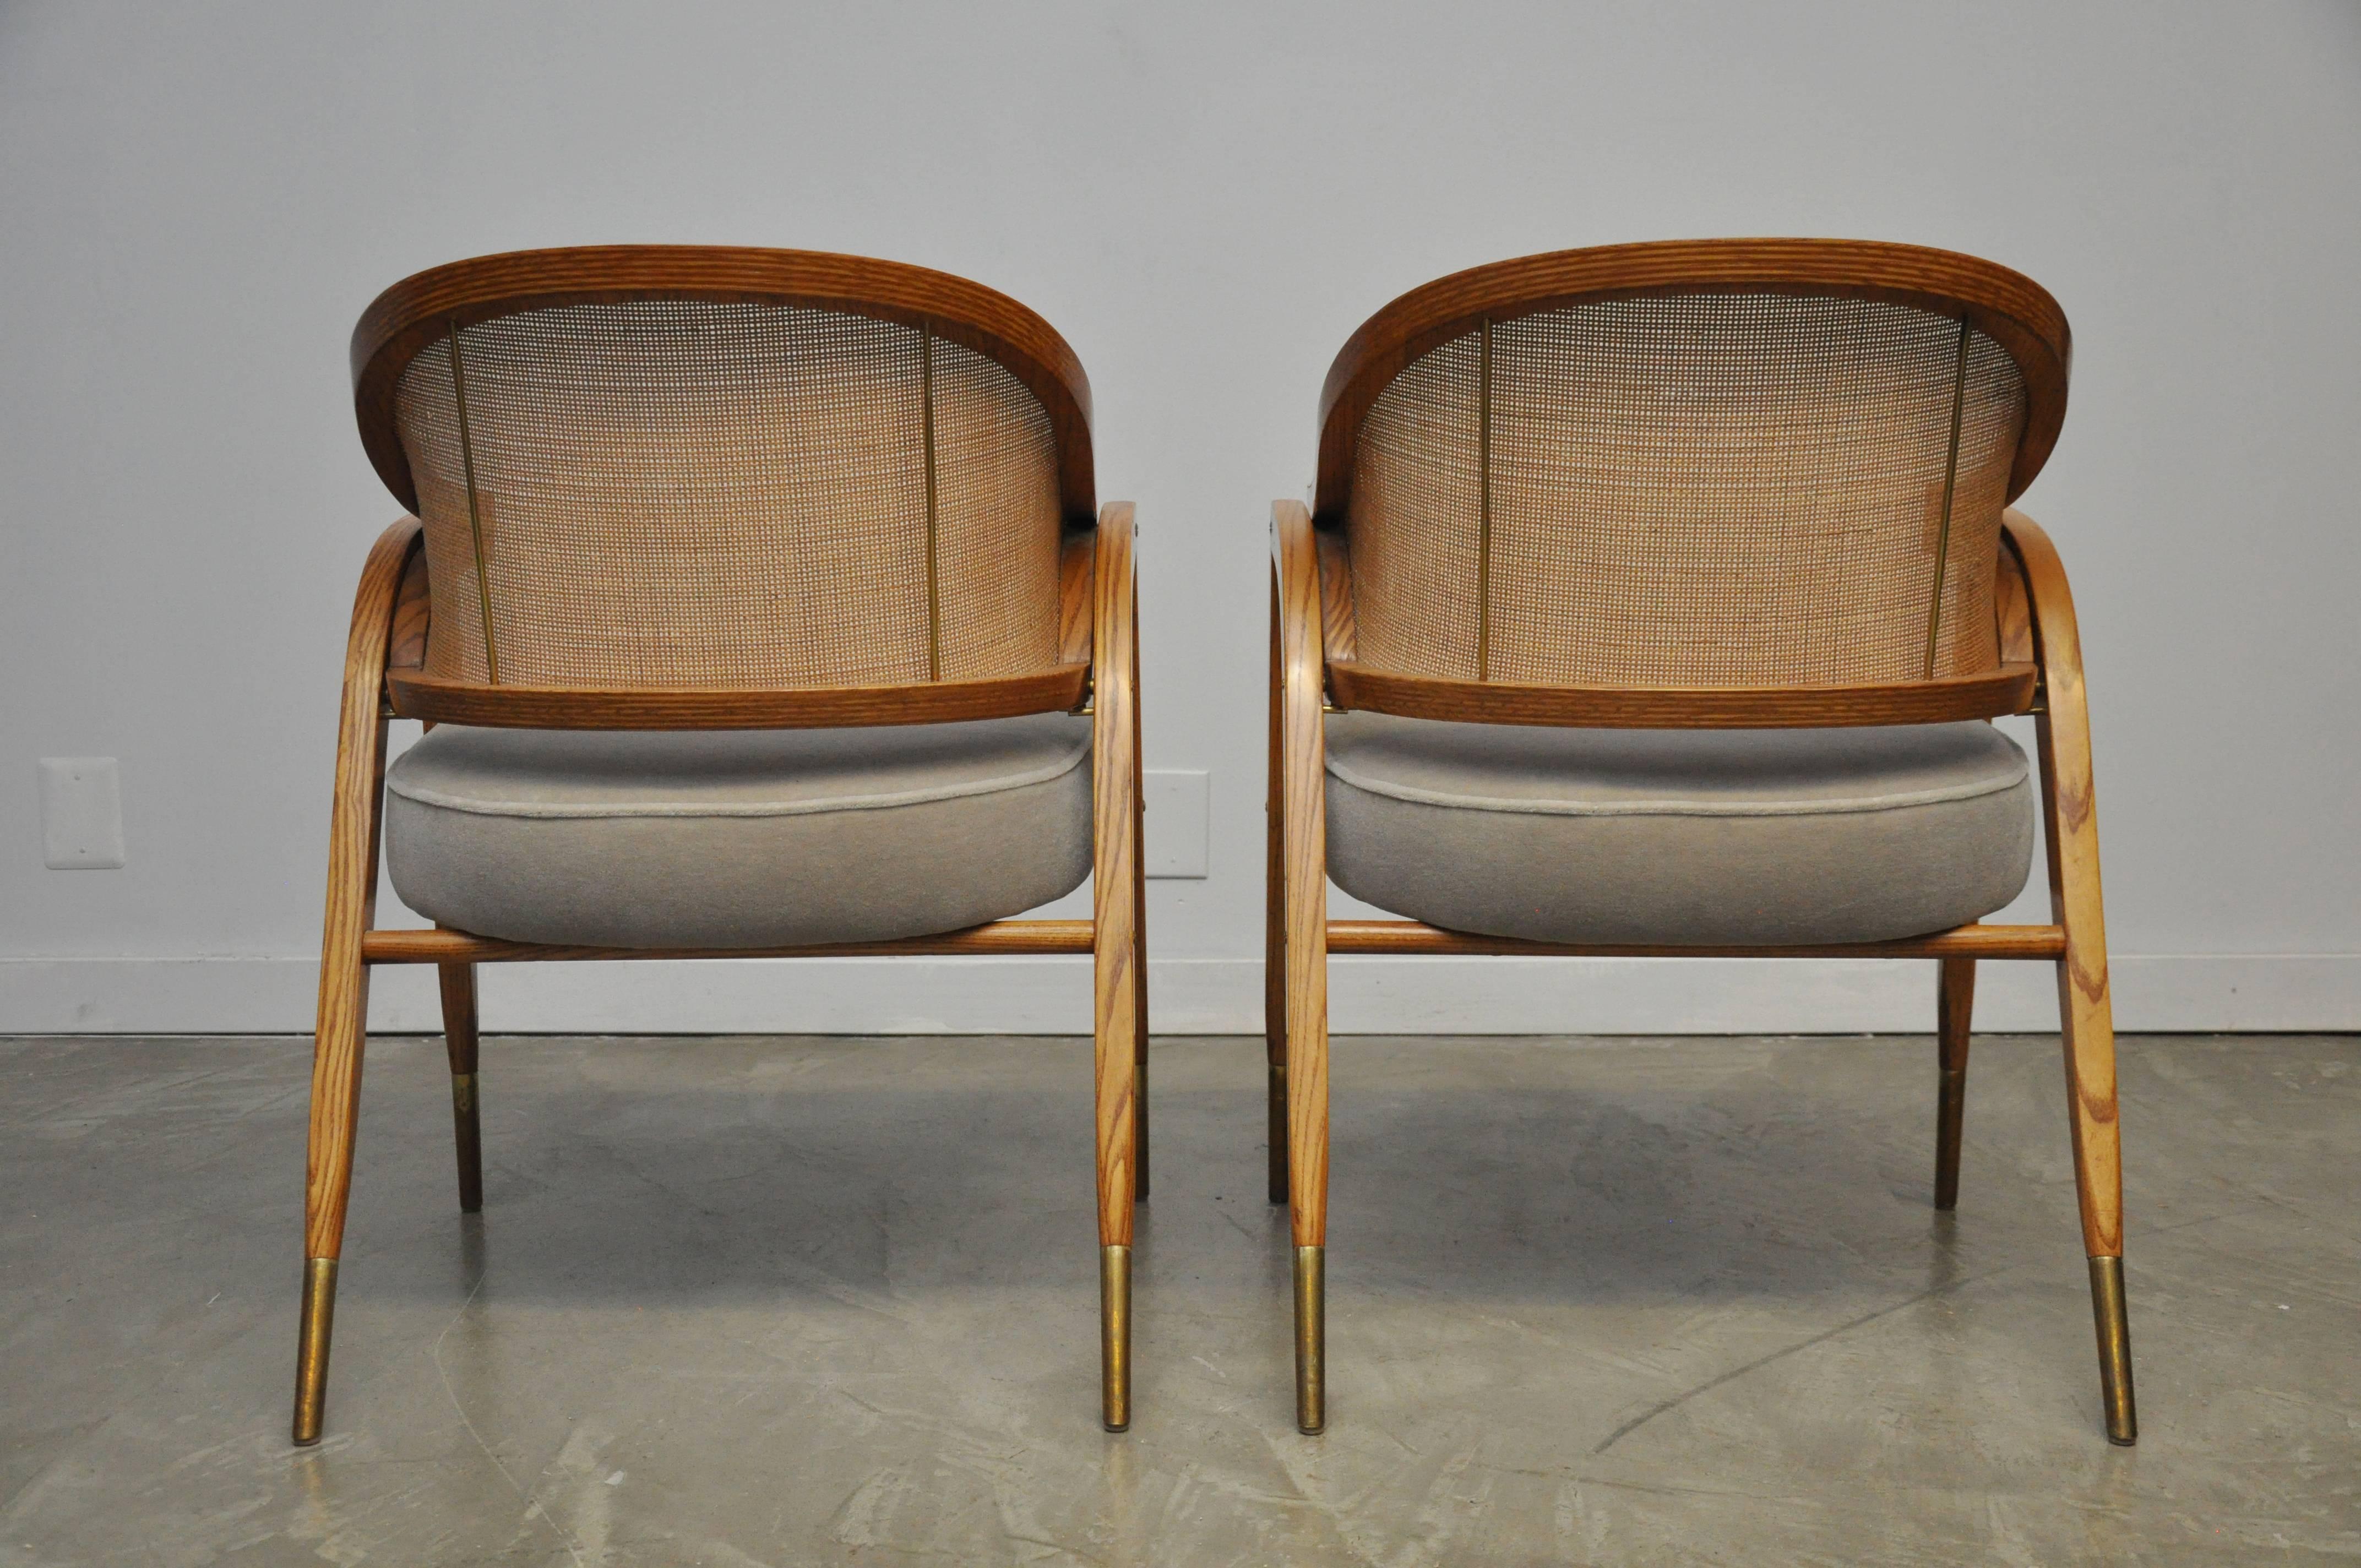 American Pair of Captain Armchairs by Edward Wormley for Dunbar